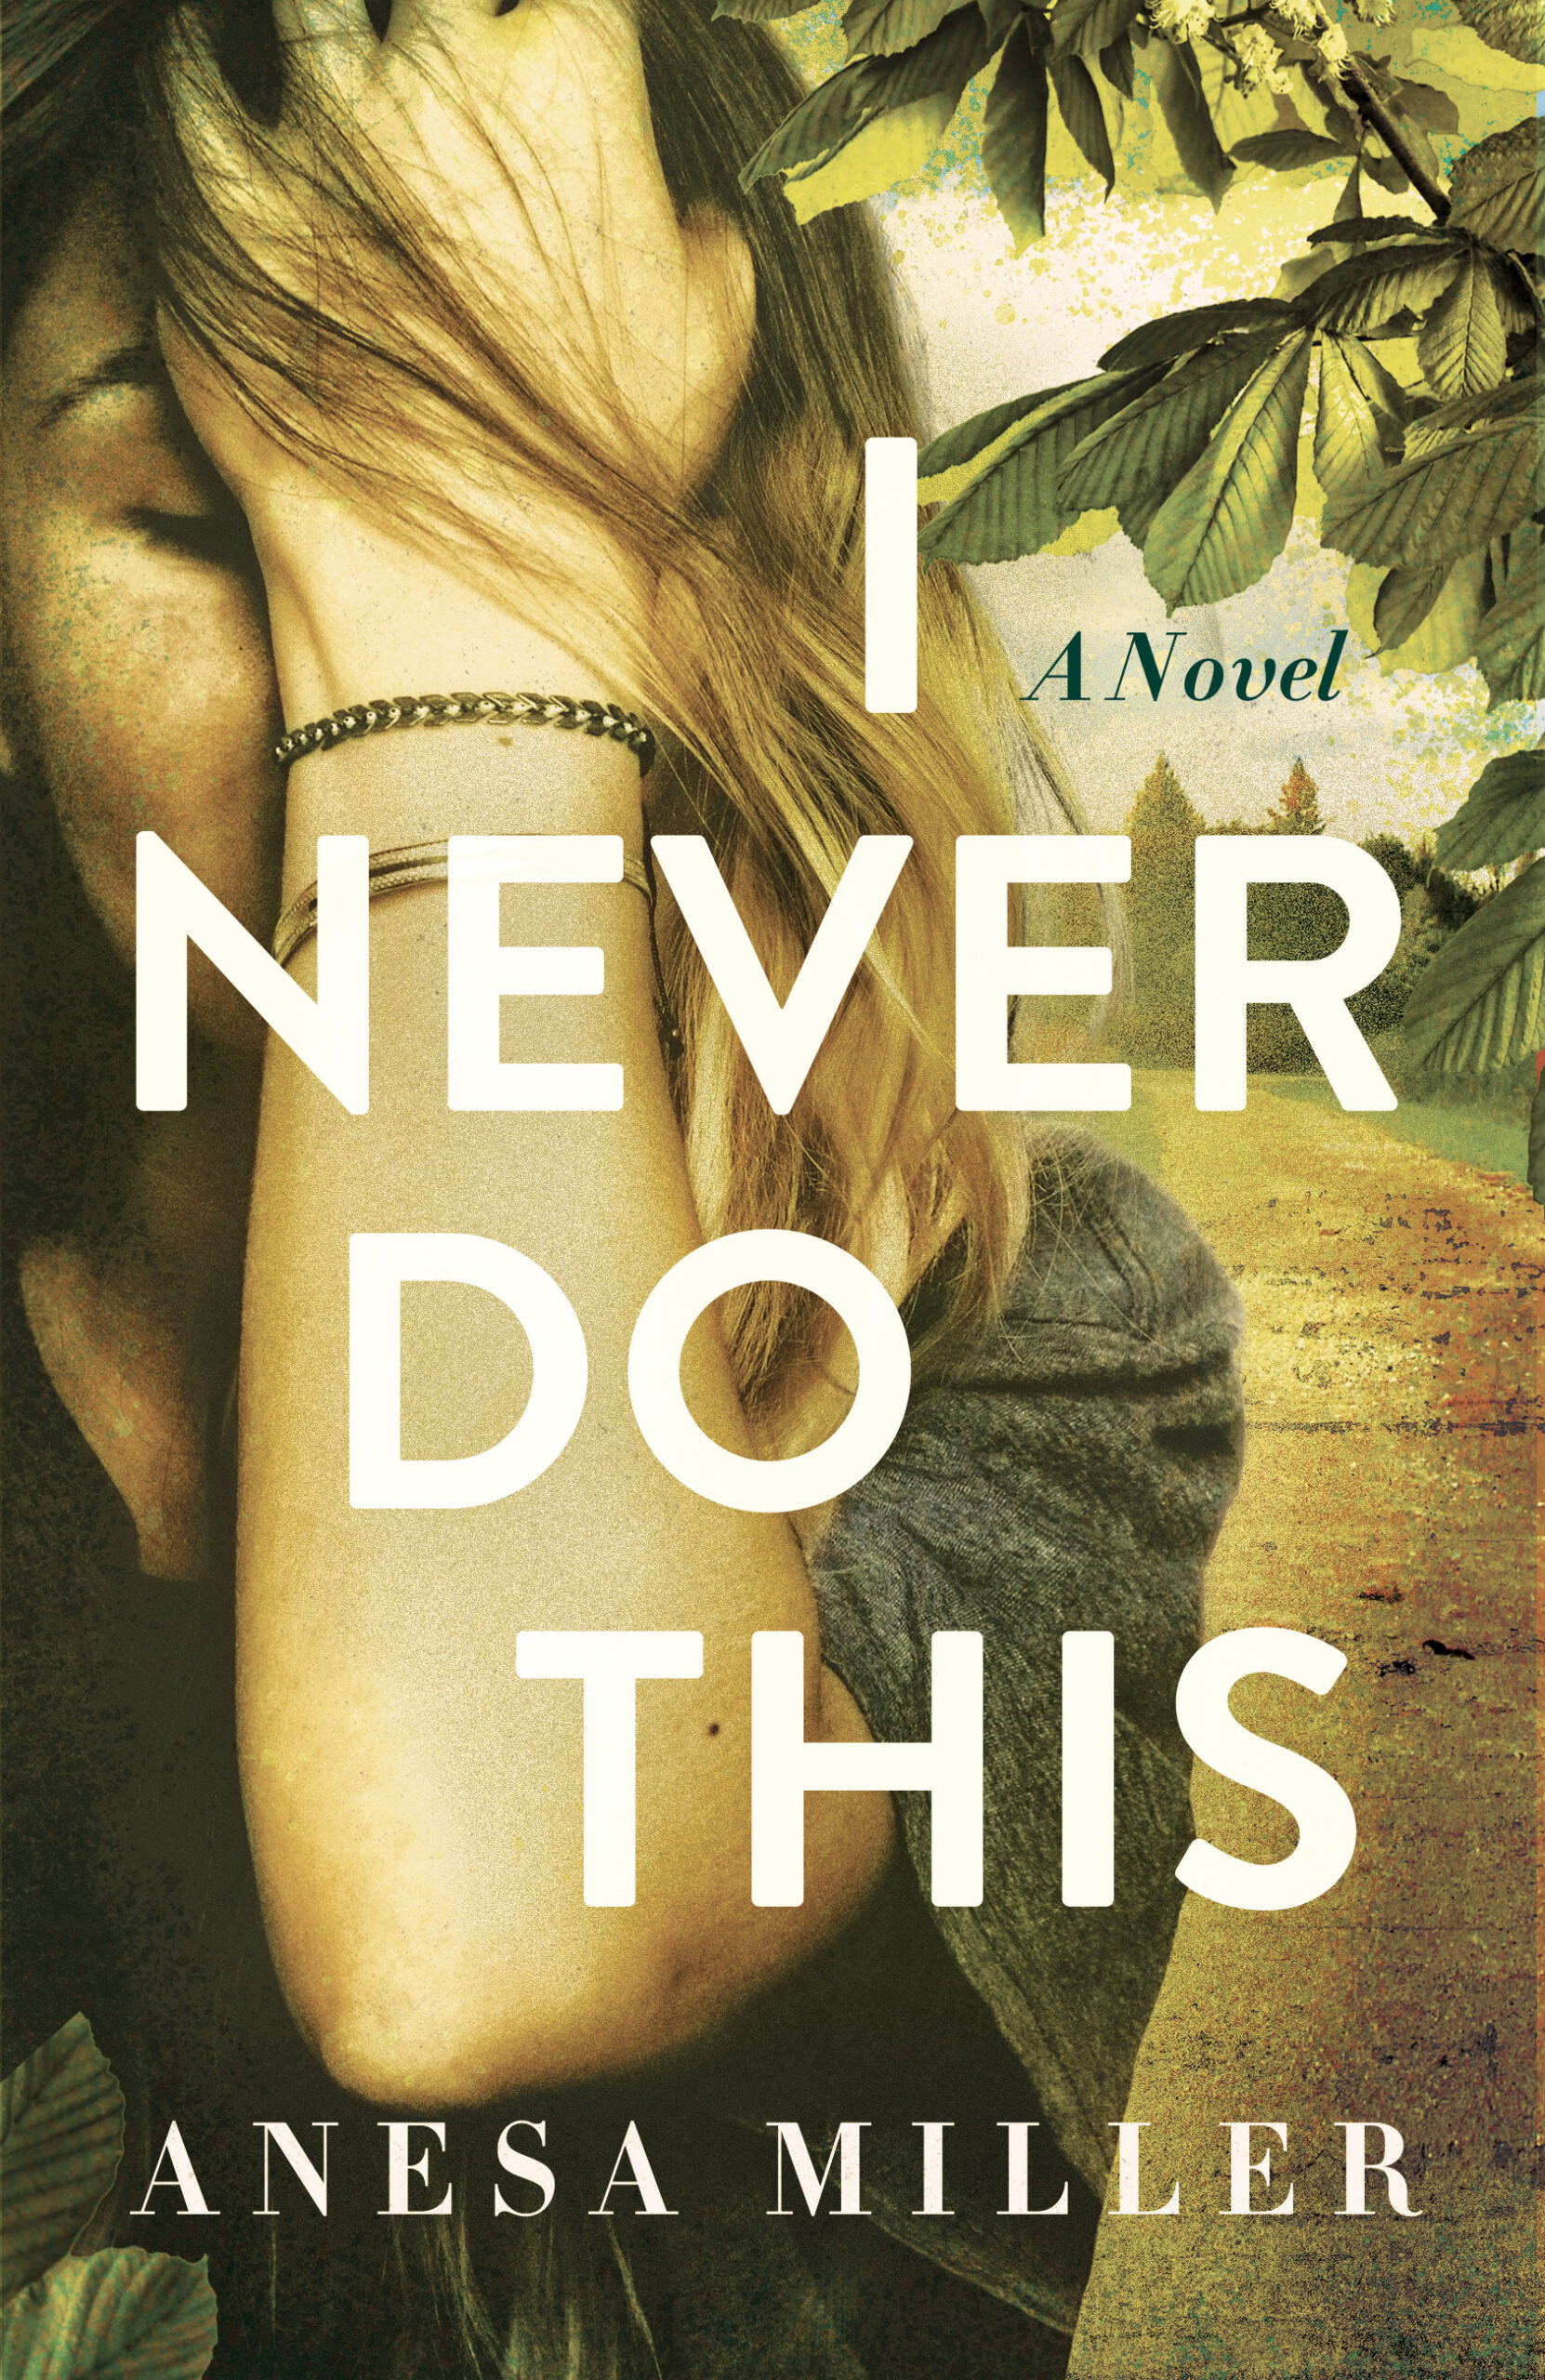 Image of the book cover for I Never Do This that depicts a young woman covering her face with her arm and hand. There is a road and trees in the background.